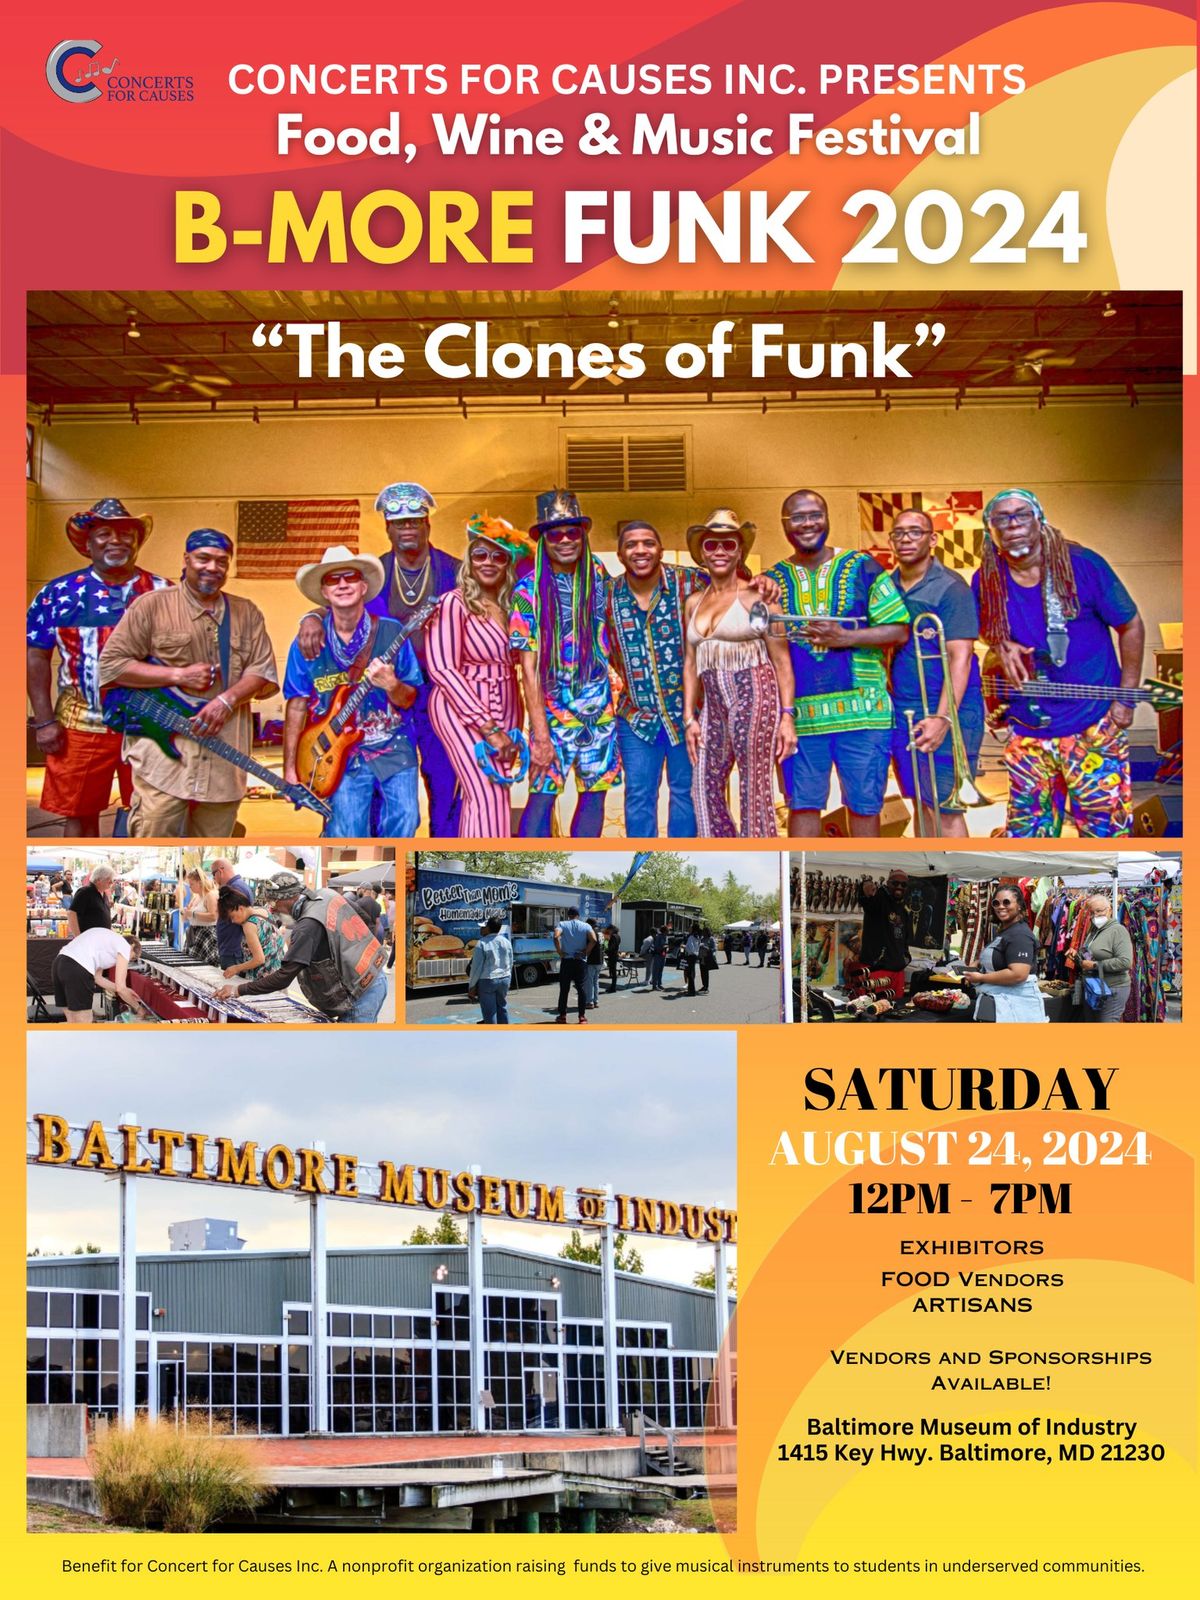 B-MORE FUNK  Food Wine and Music festival 2024 by Concerts for Causes Inc.